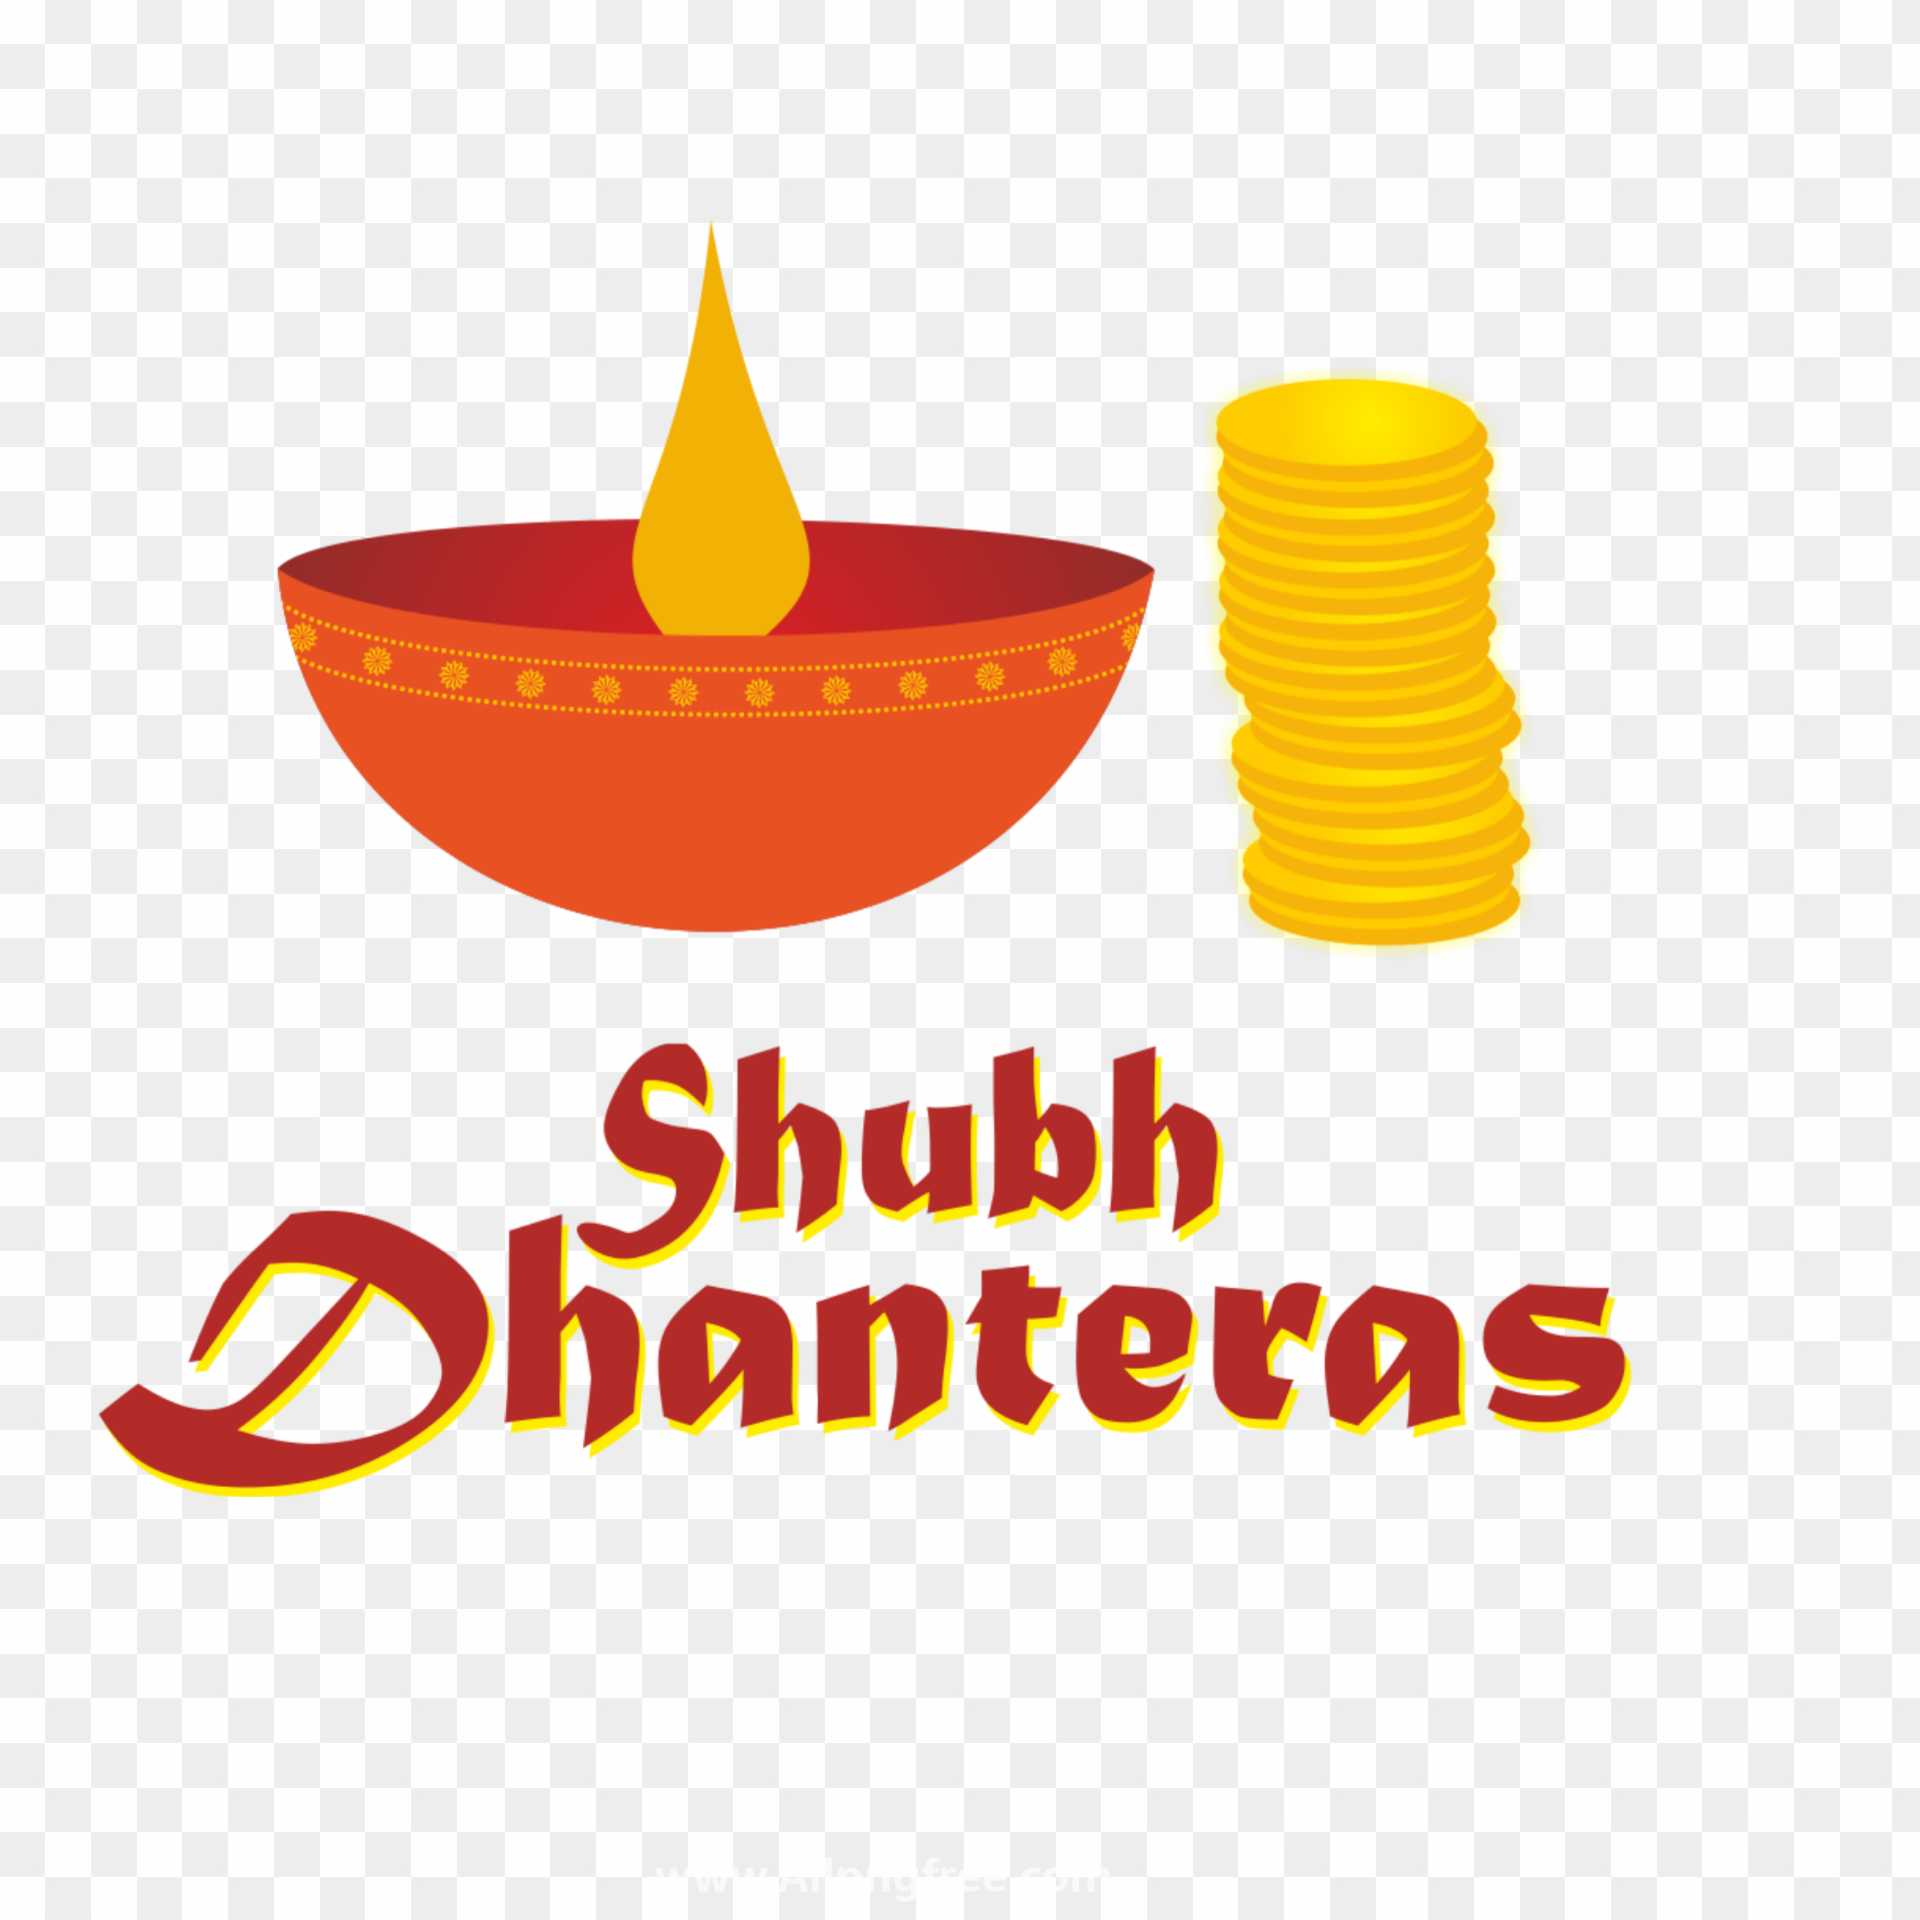 Shubh Dhanteras png images 